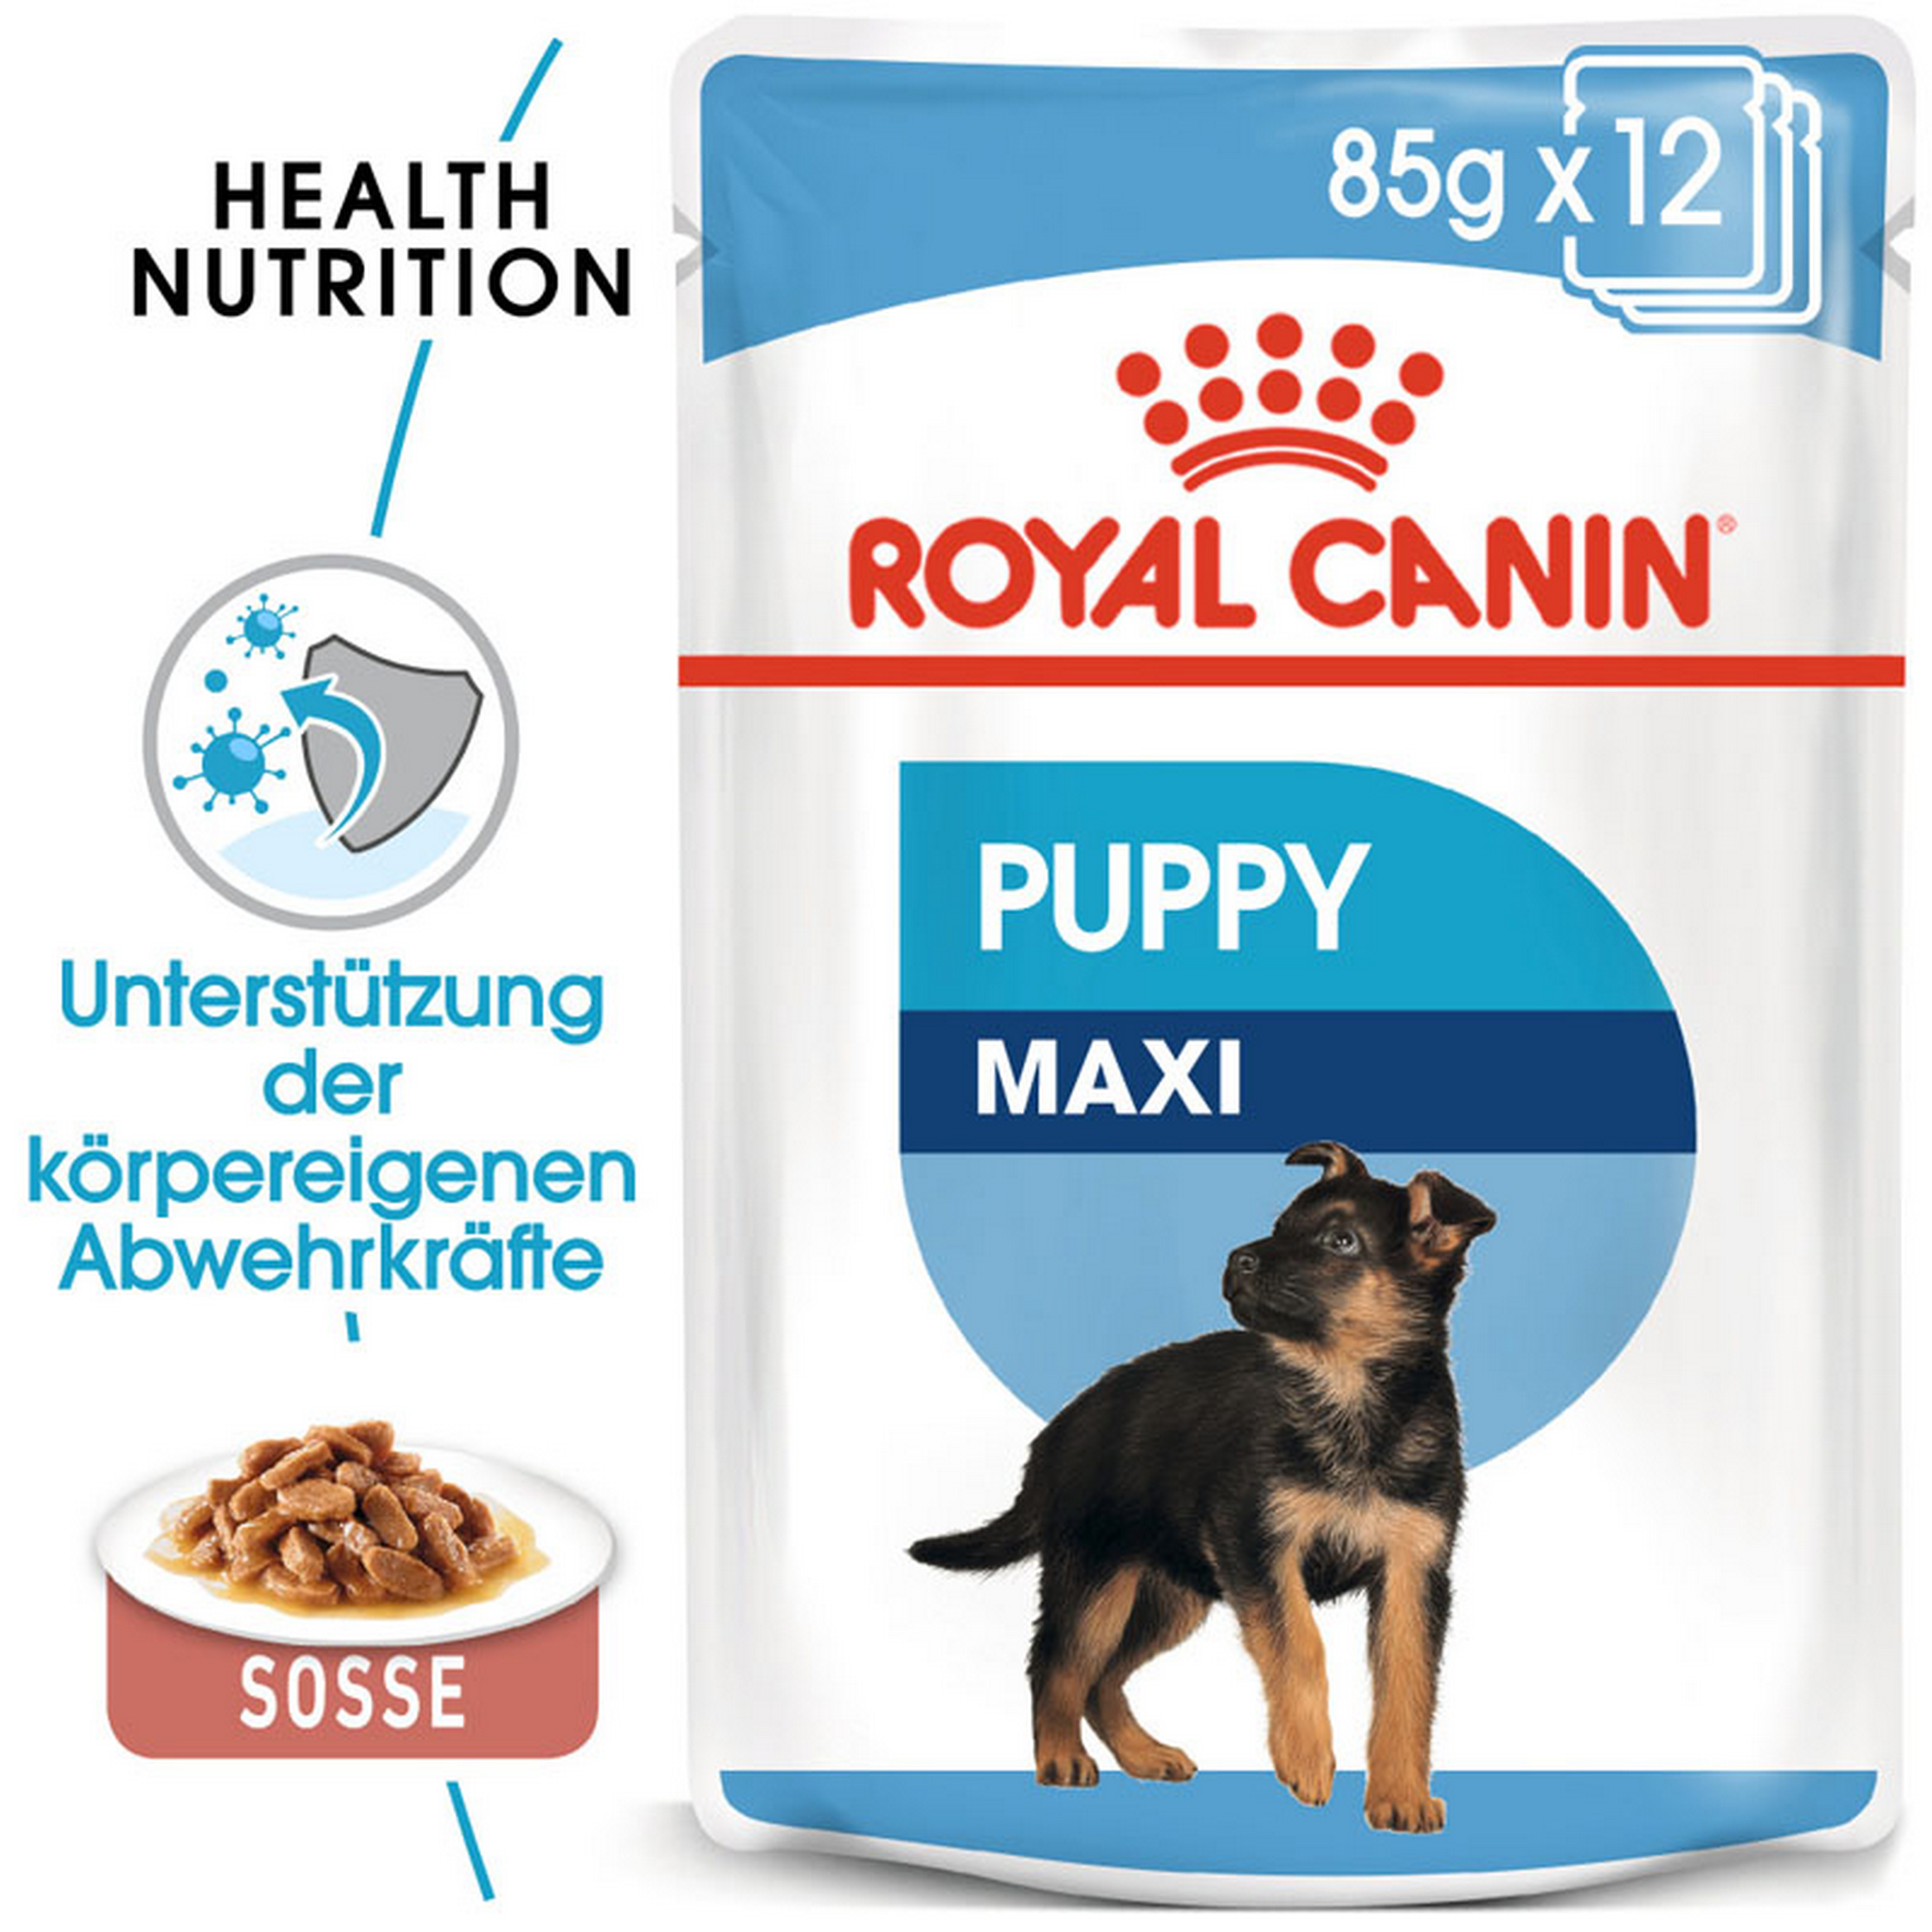 ROYAL CANIN MAXI PUPPY Welpenfutter nass für große Hunde + product picture